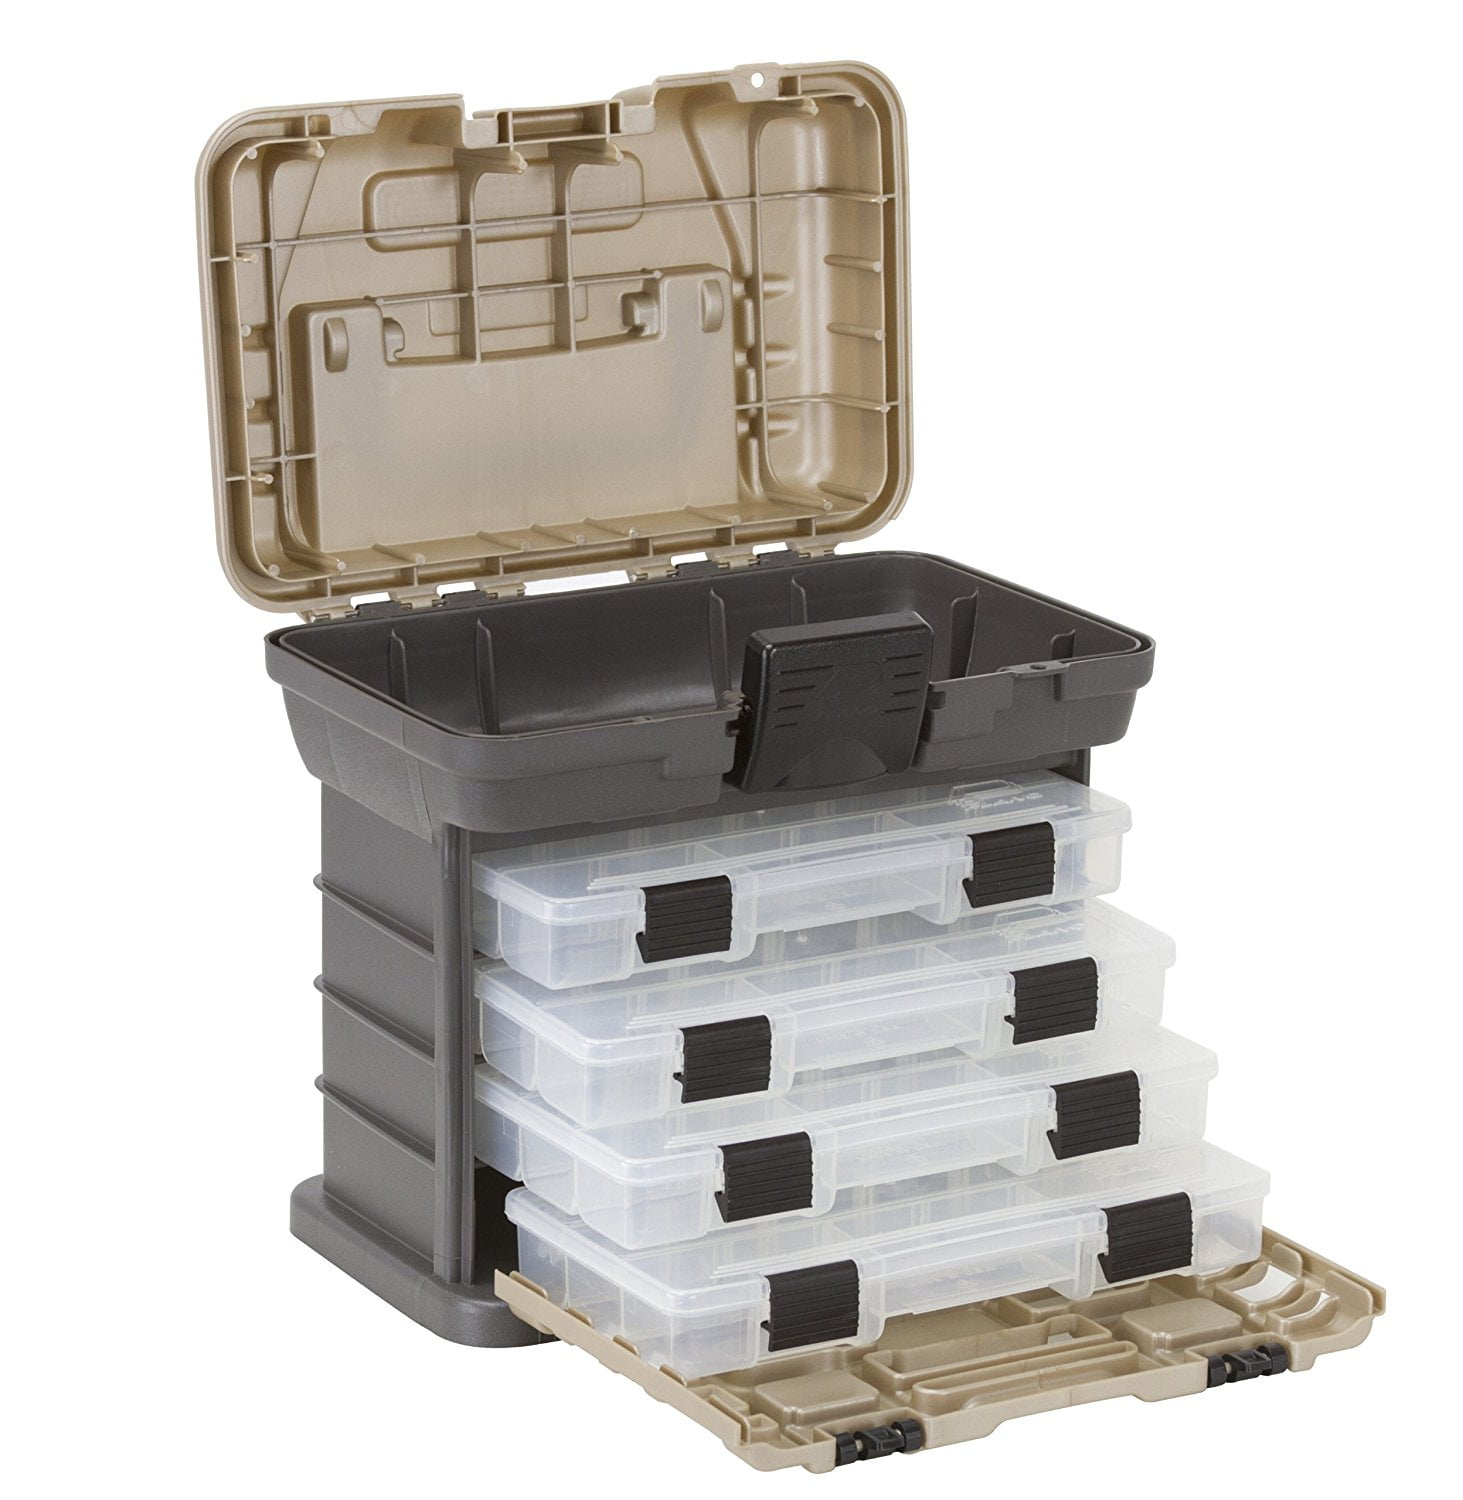 Plano 1354 Stow-N-Go Tool Box with 23500 Series StowAways, Graphite Gray  and Sandstone 